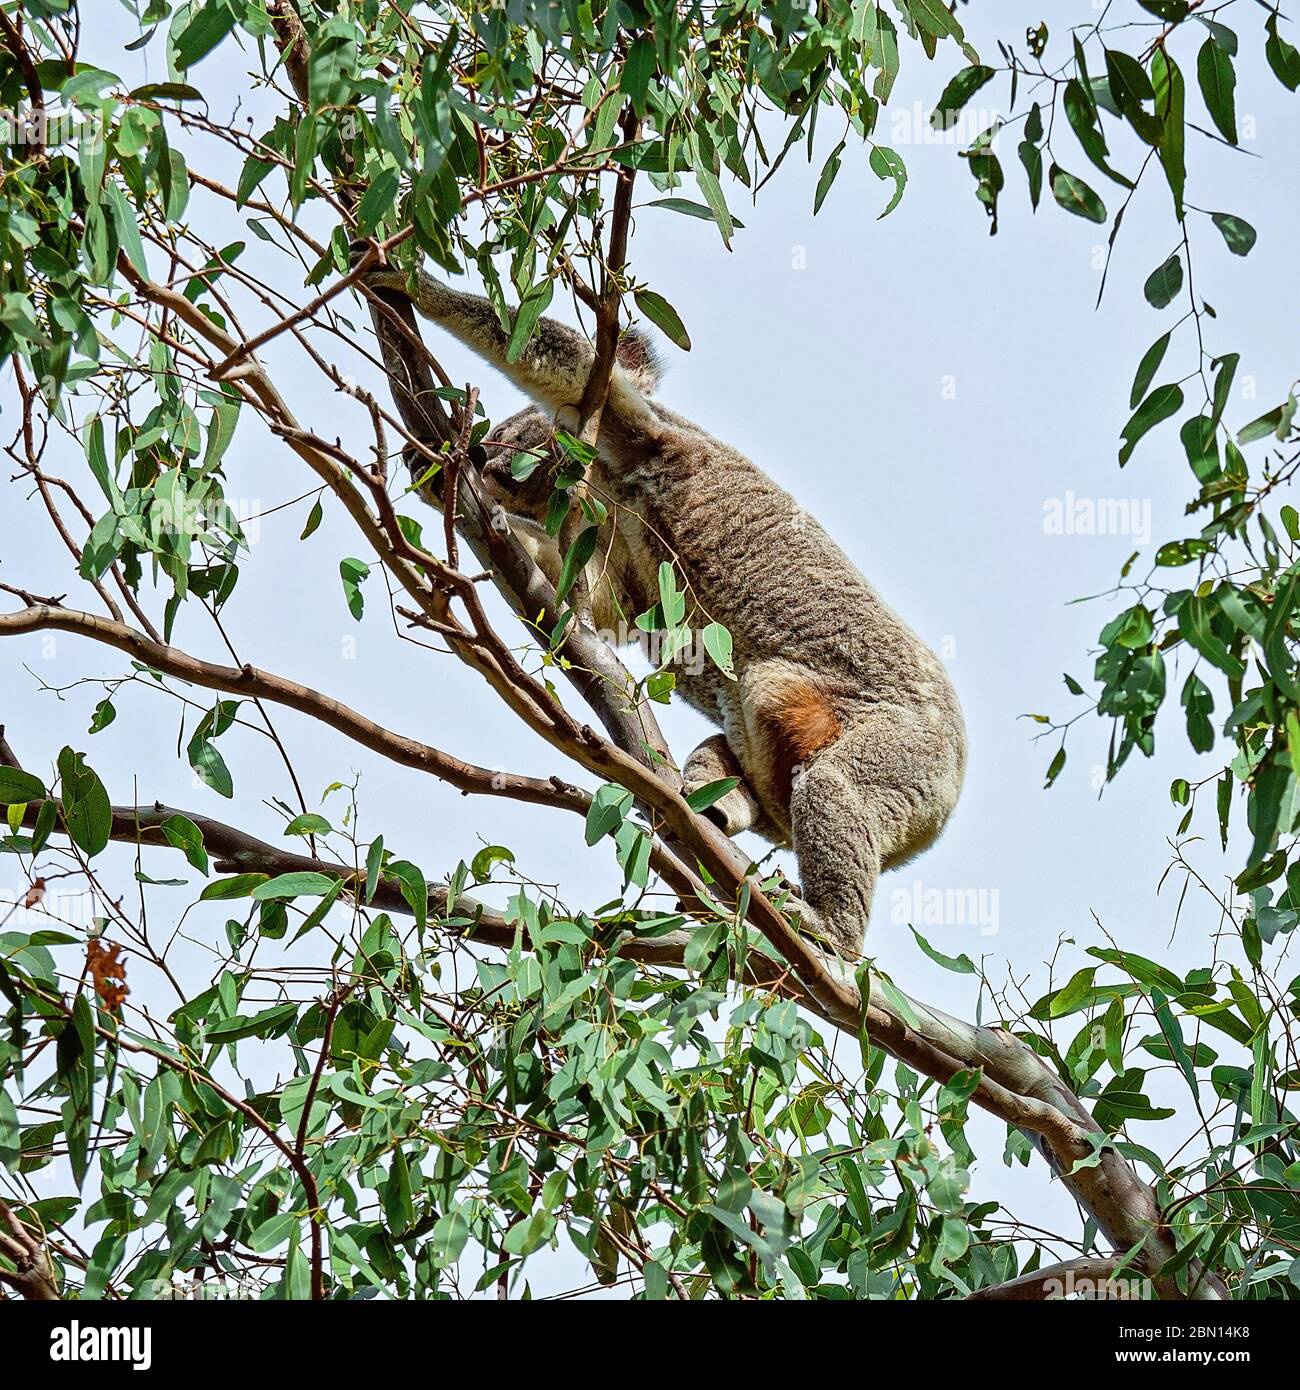 A female Australian koala climbing the branch of a eucalyptus tree with a joey in her pouch Stock Photo